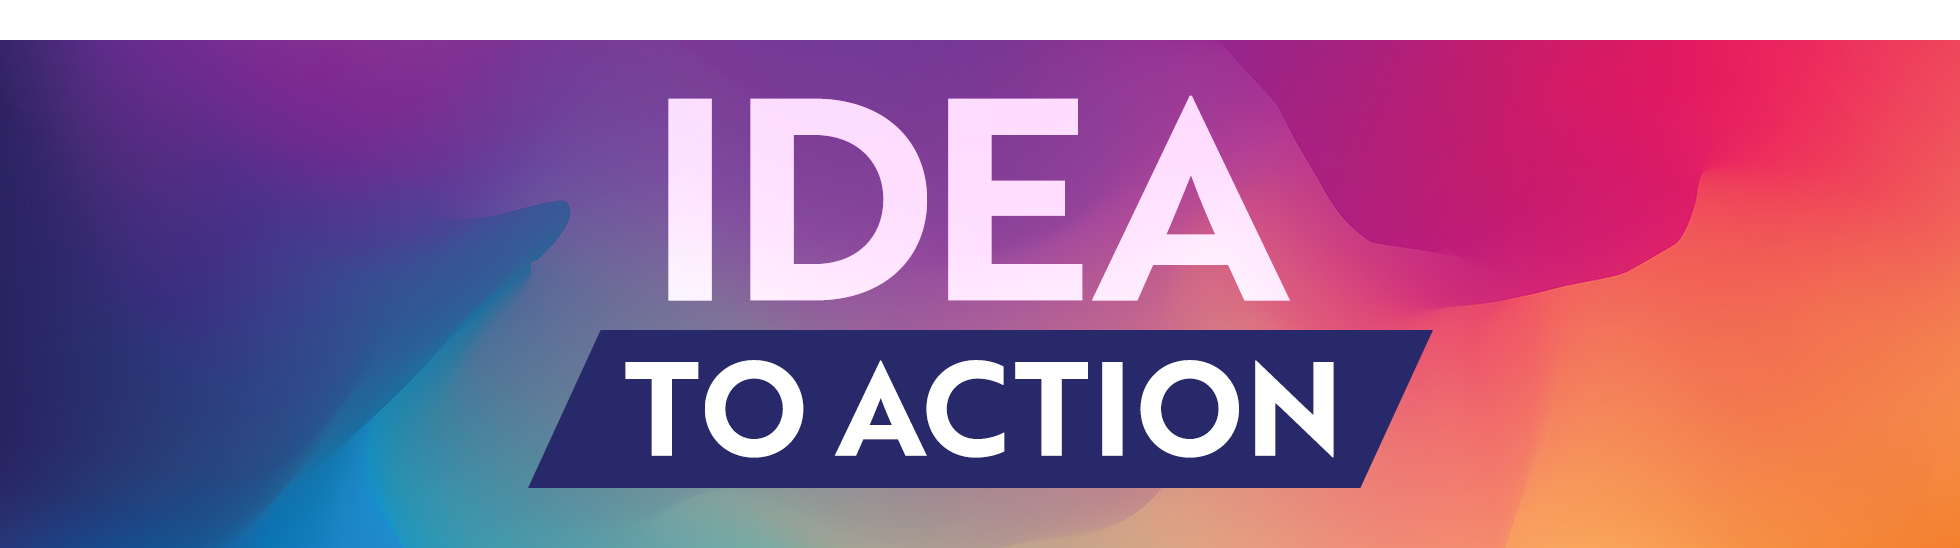 IDEA To Action